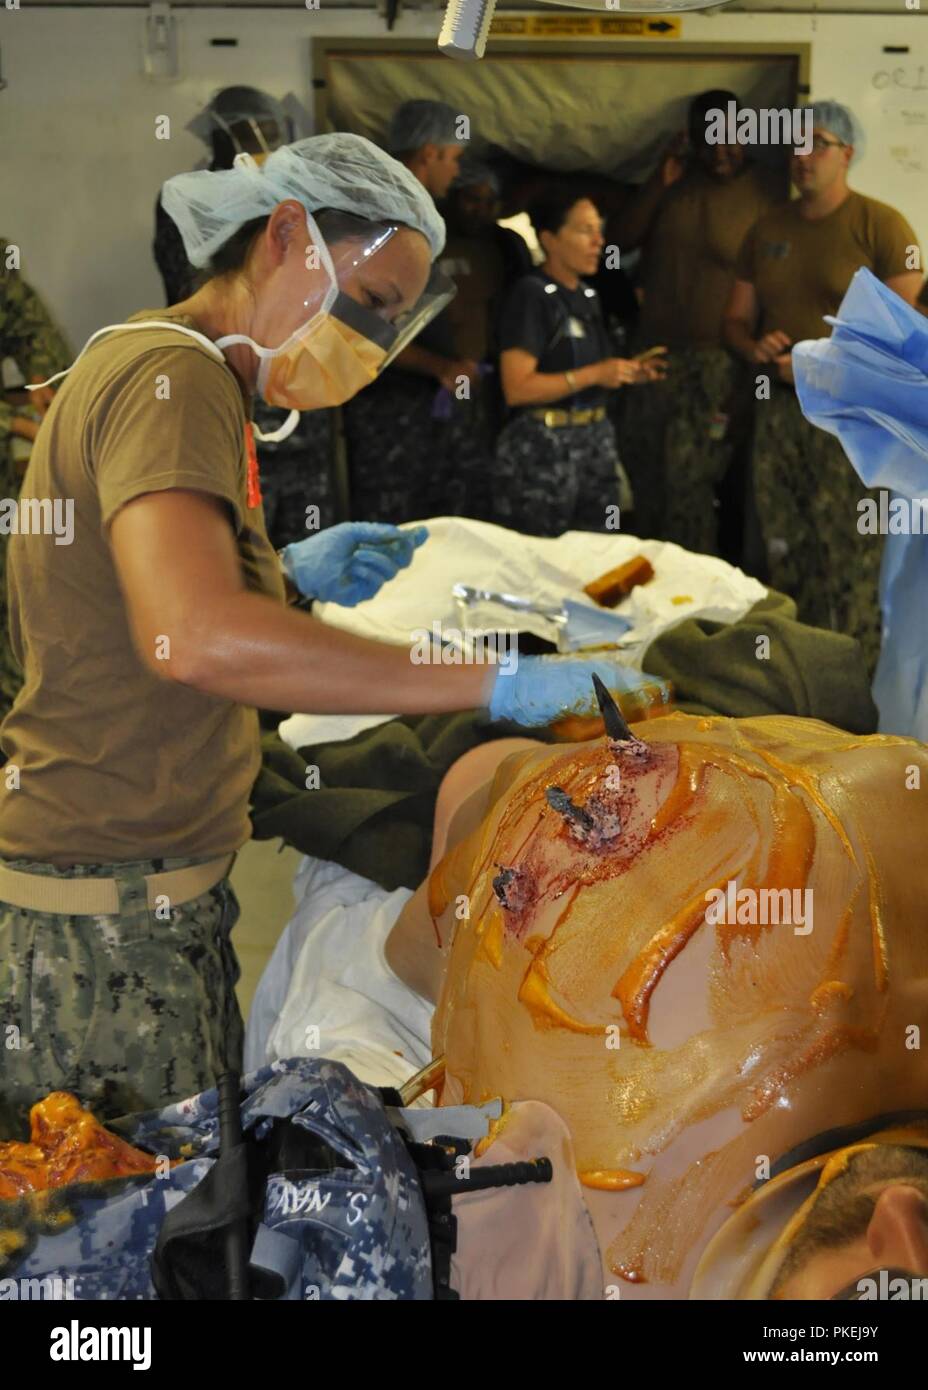 CAMP PENDELTON, Calif. (July 25, 2018) – Lt. Shelah Roanhorse prepares a simulated casualty for surgery during an Expeditionary Medical Facility (EMF) training course at Naval Expeditionary Medical Training Institute (NEMTI). EMF is the Navy’s largest land-based medical platform, which meets the requirement to establish, operate and maintain a medical facility overseas that remains readily deployable. NEMTI is a detachment of Navy Medicine Operational Training Center (NMOTC), whose mission is to provide operational medical and aviation survival training. Stock Photo